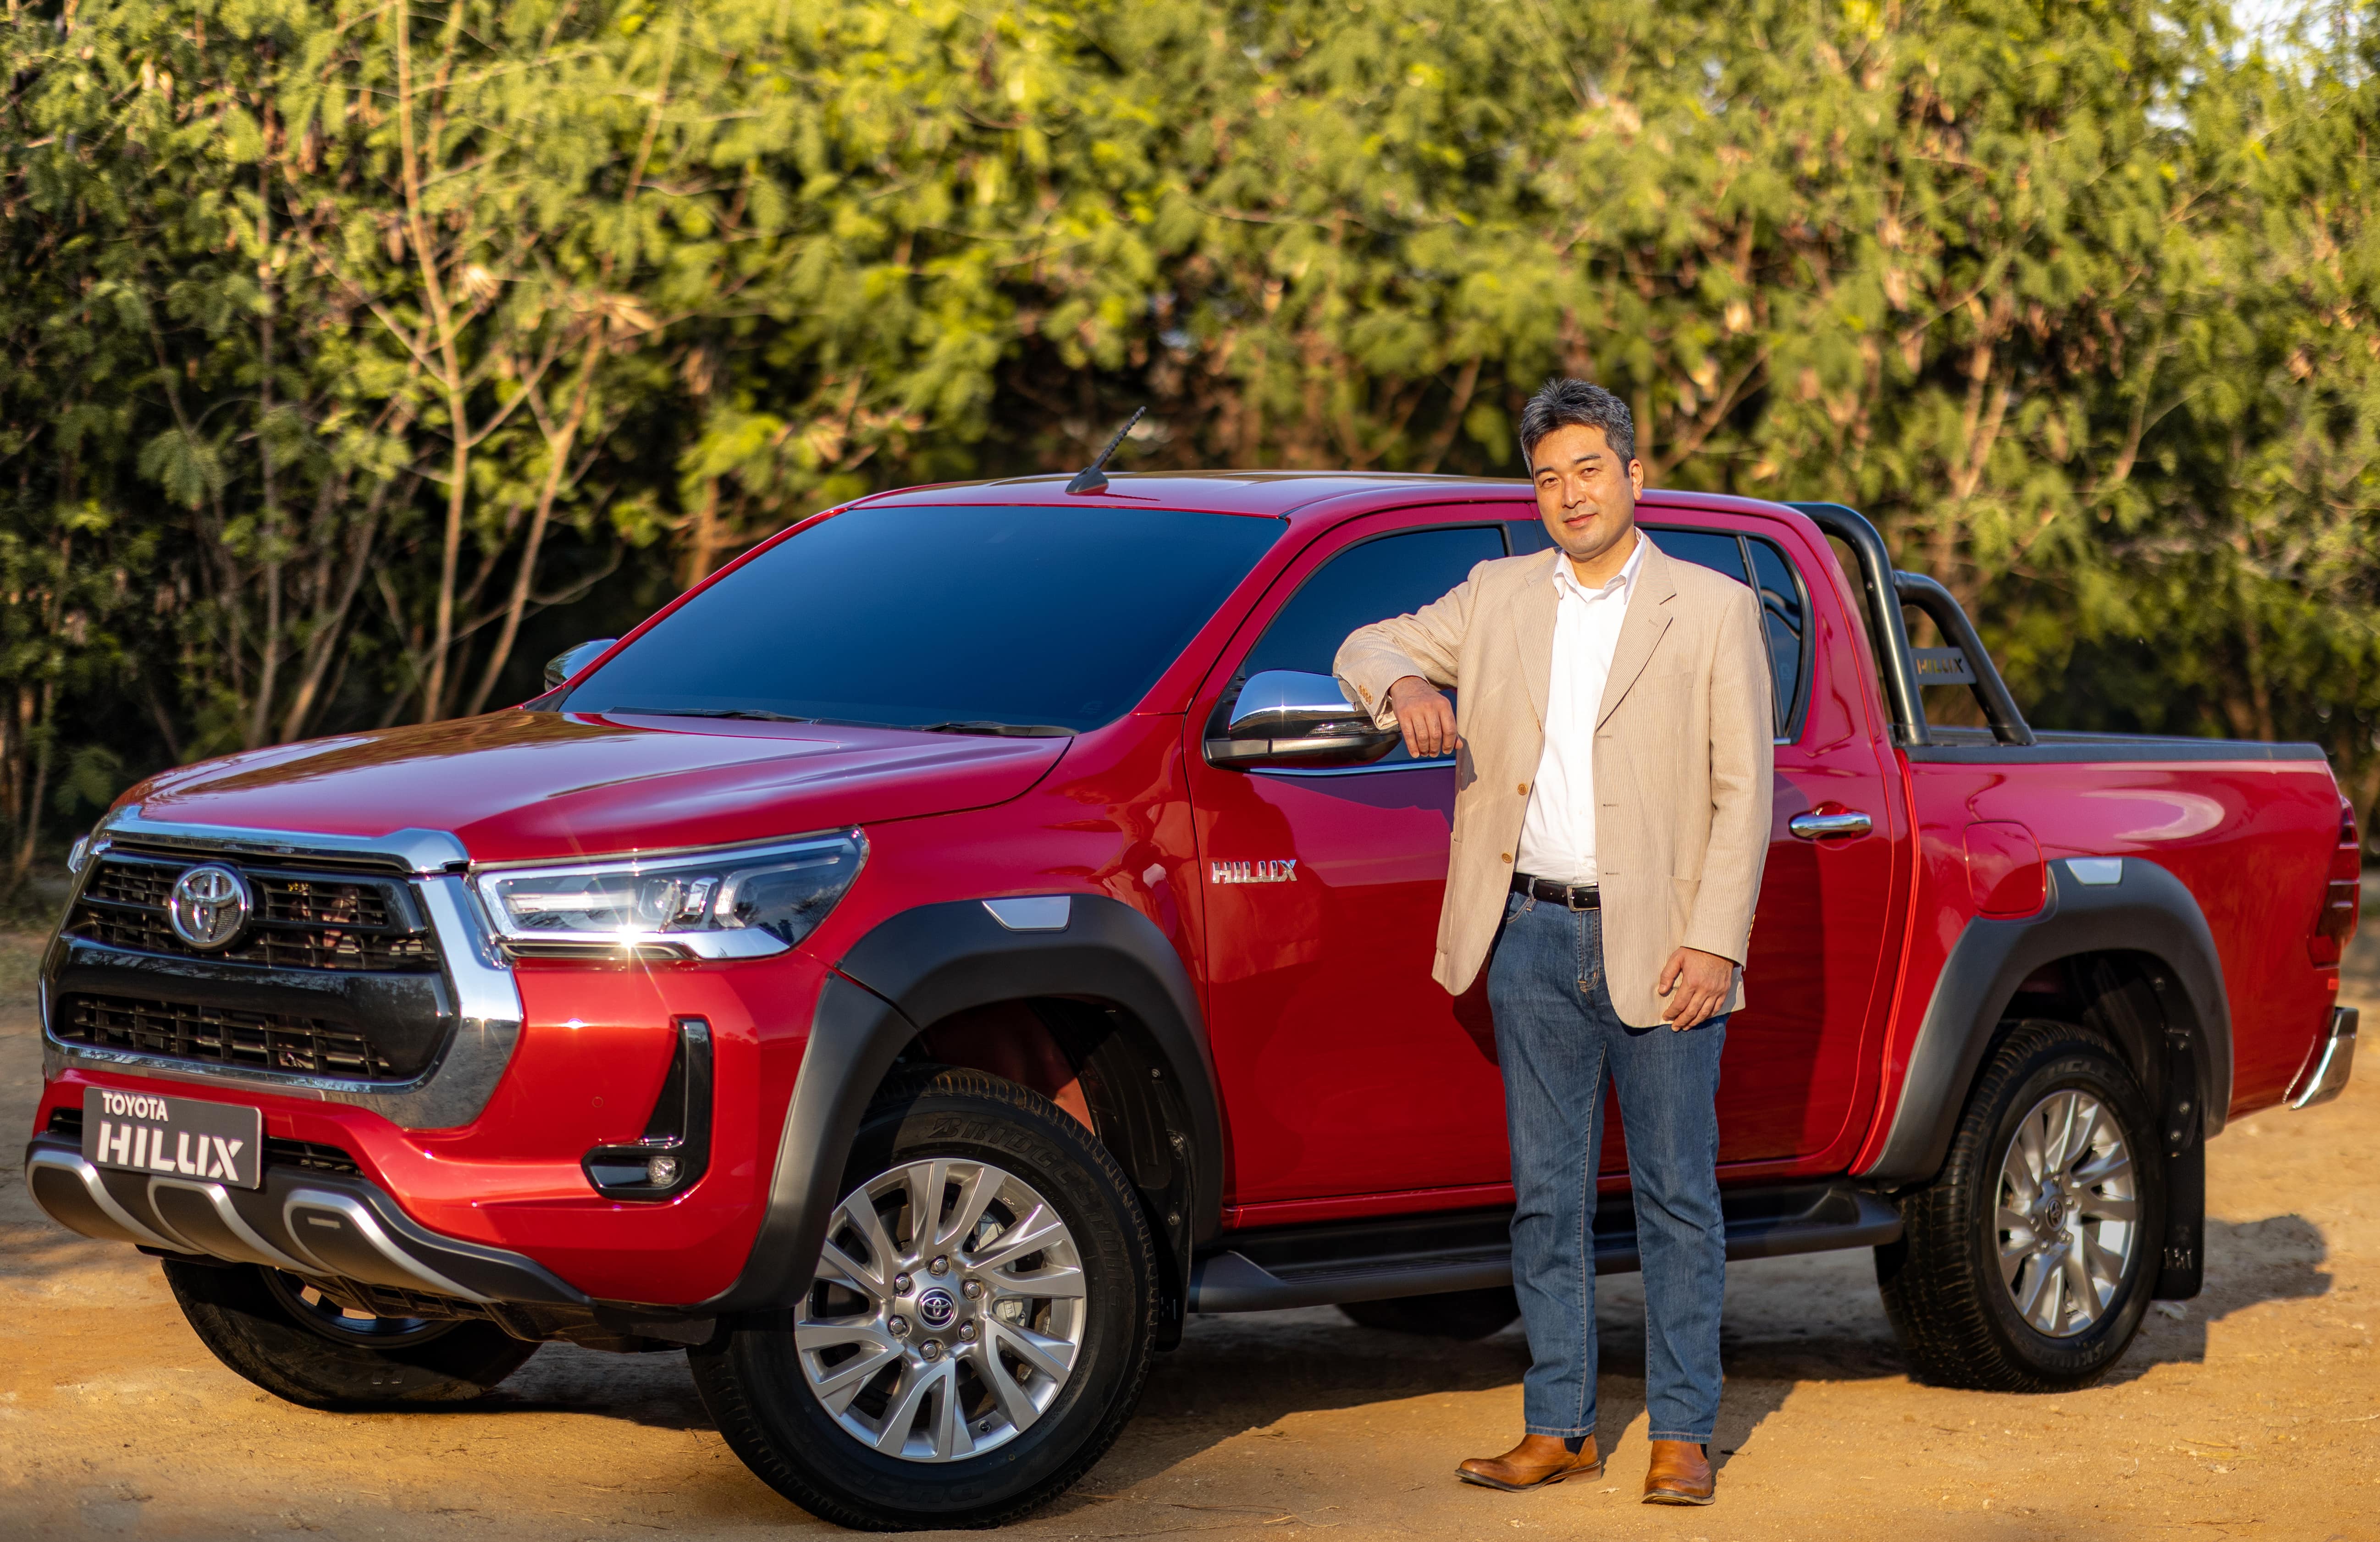 Toyota Kirloskar Motor Launches India’s Much-Awaited Lifestyle Utility Vehicle - The Hilux